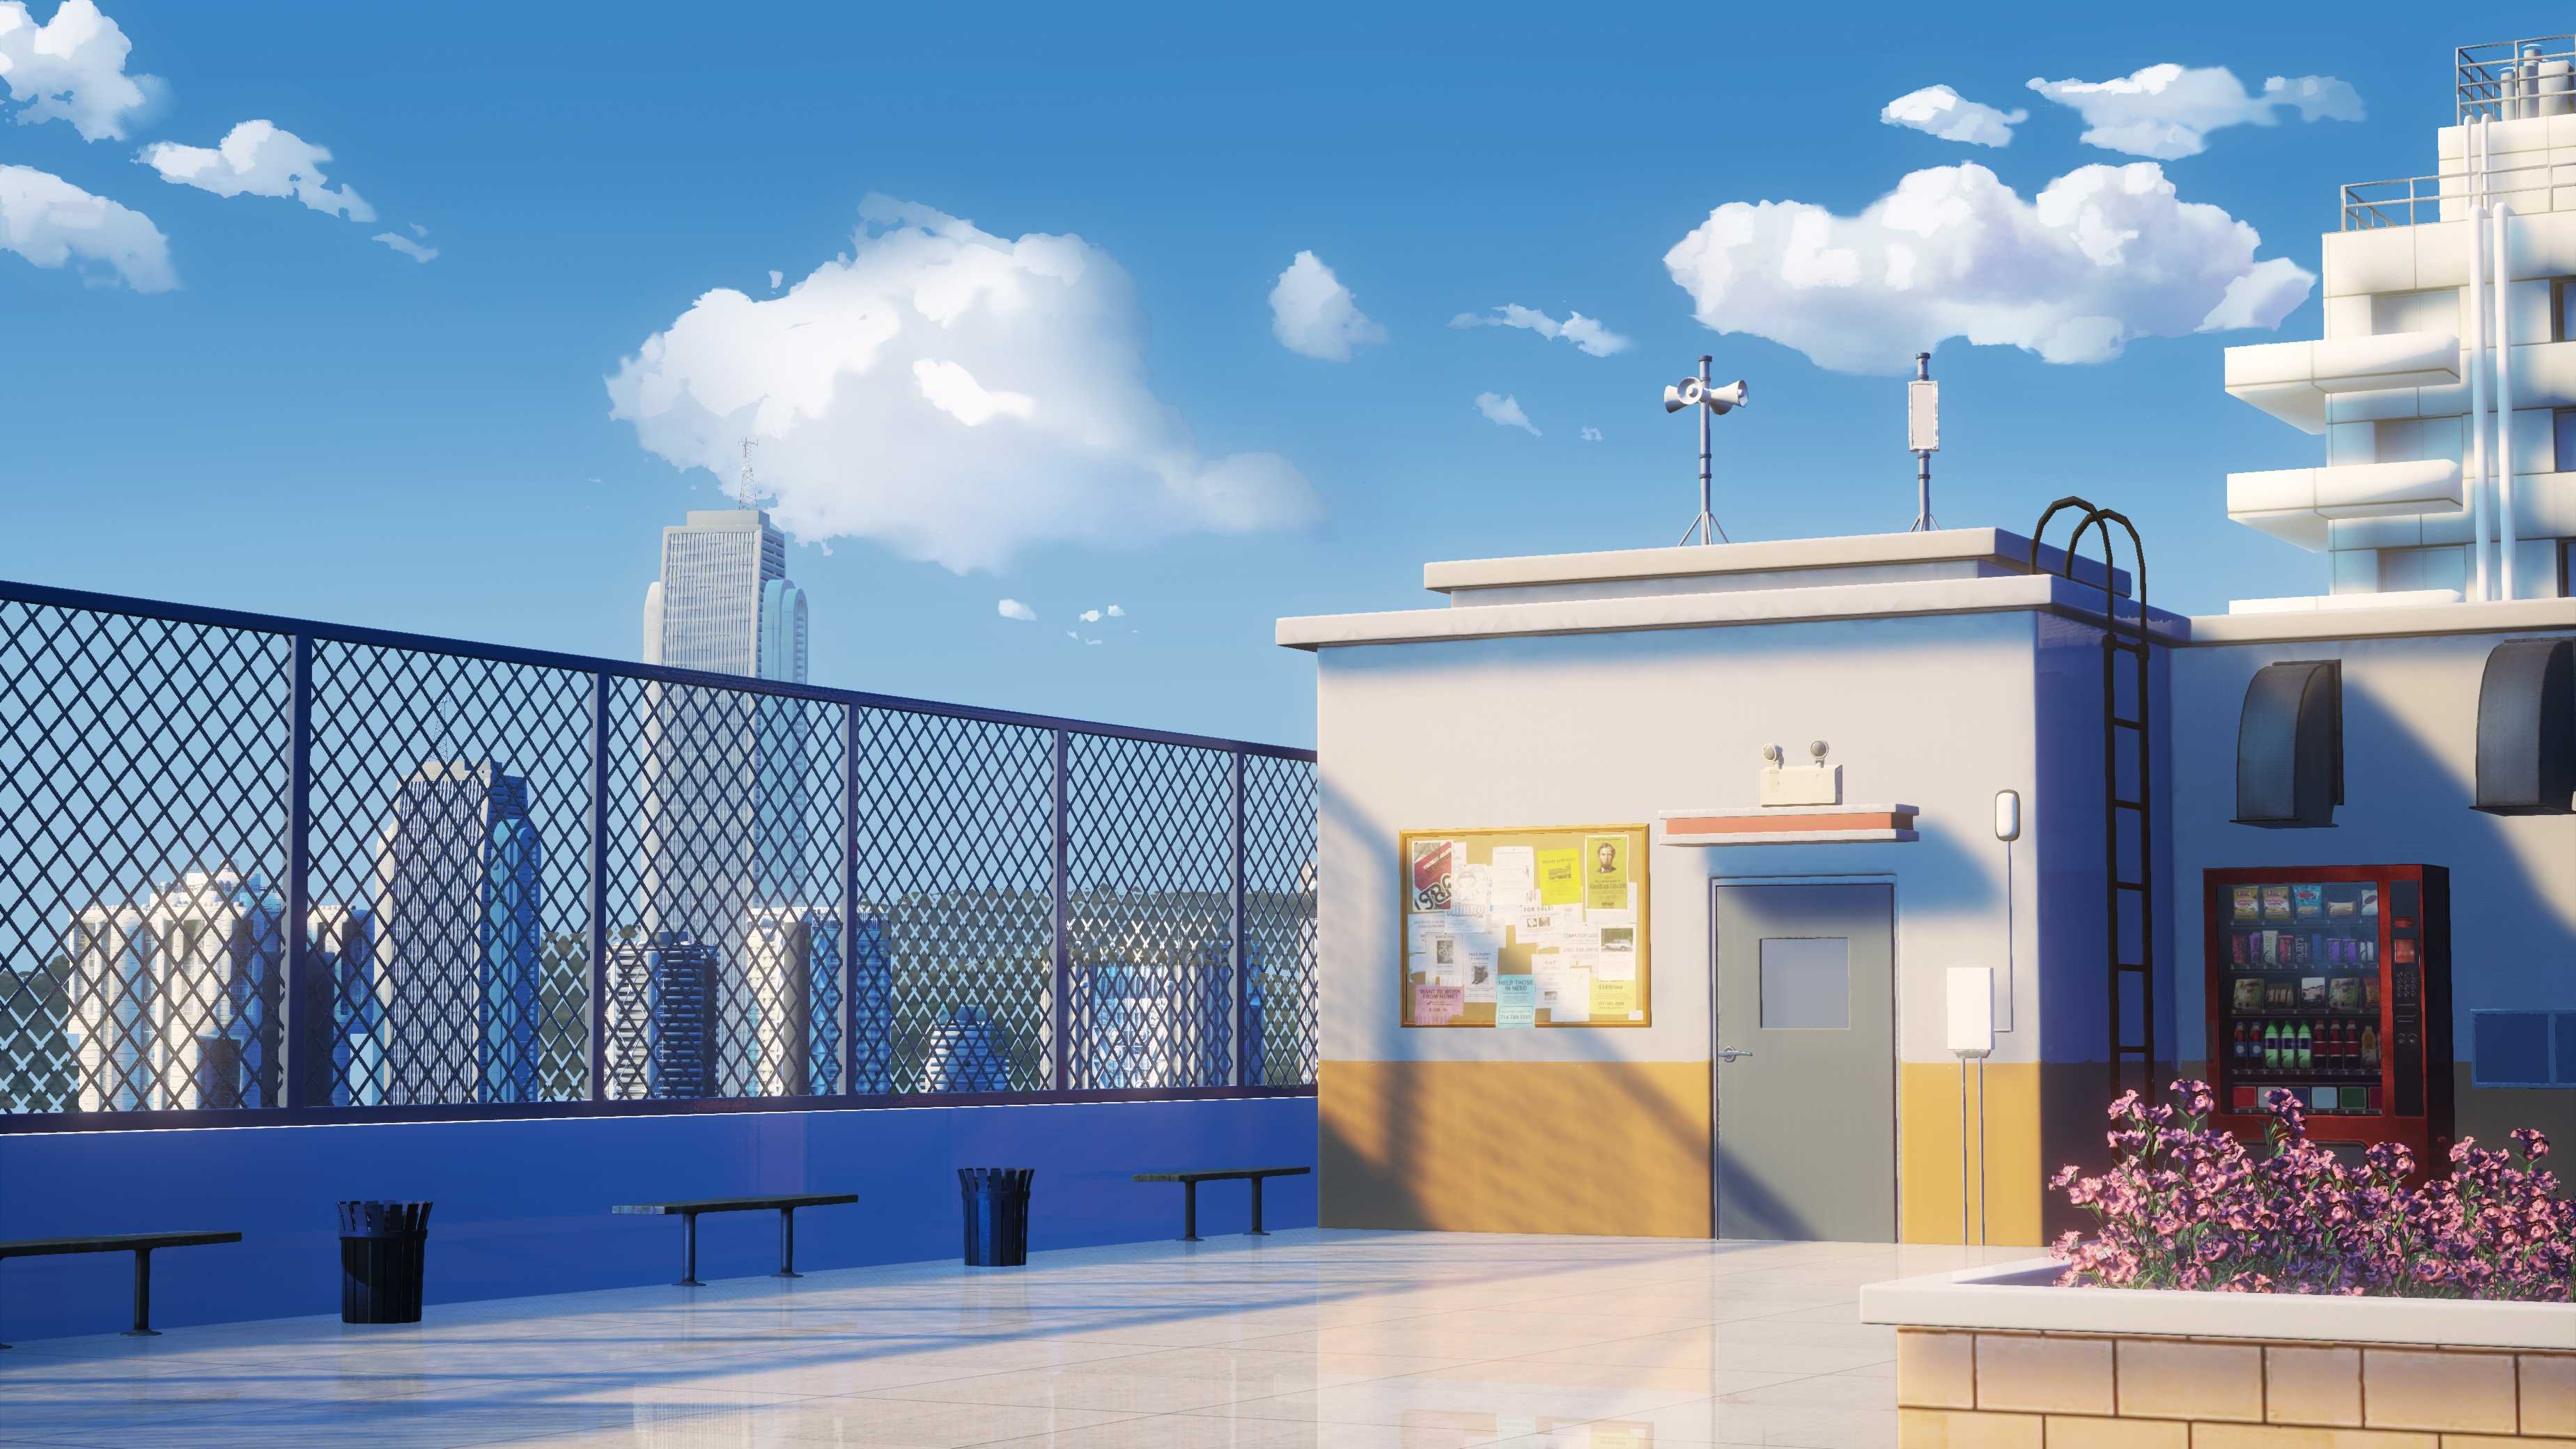 Anime City Anime Rooftopping Clouds Building Sky Vending Machine 3698x2080